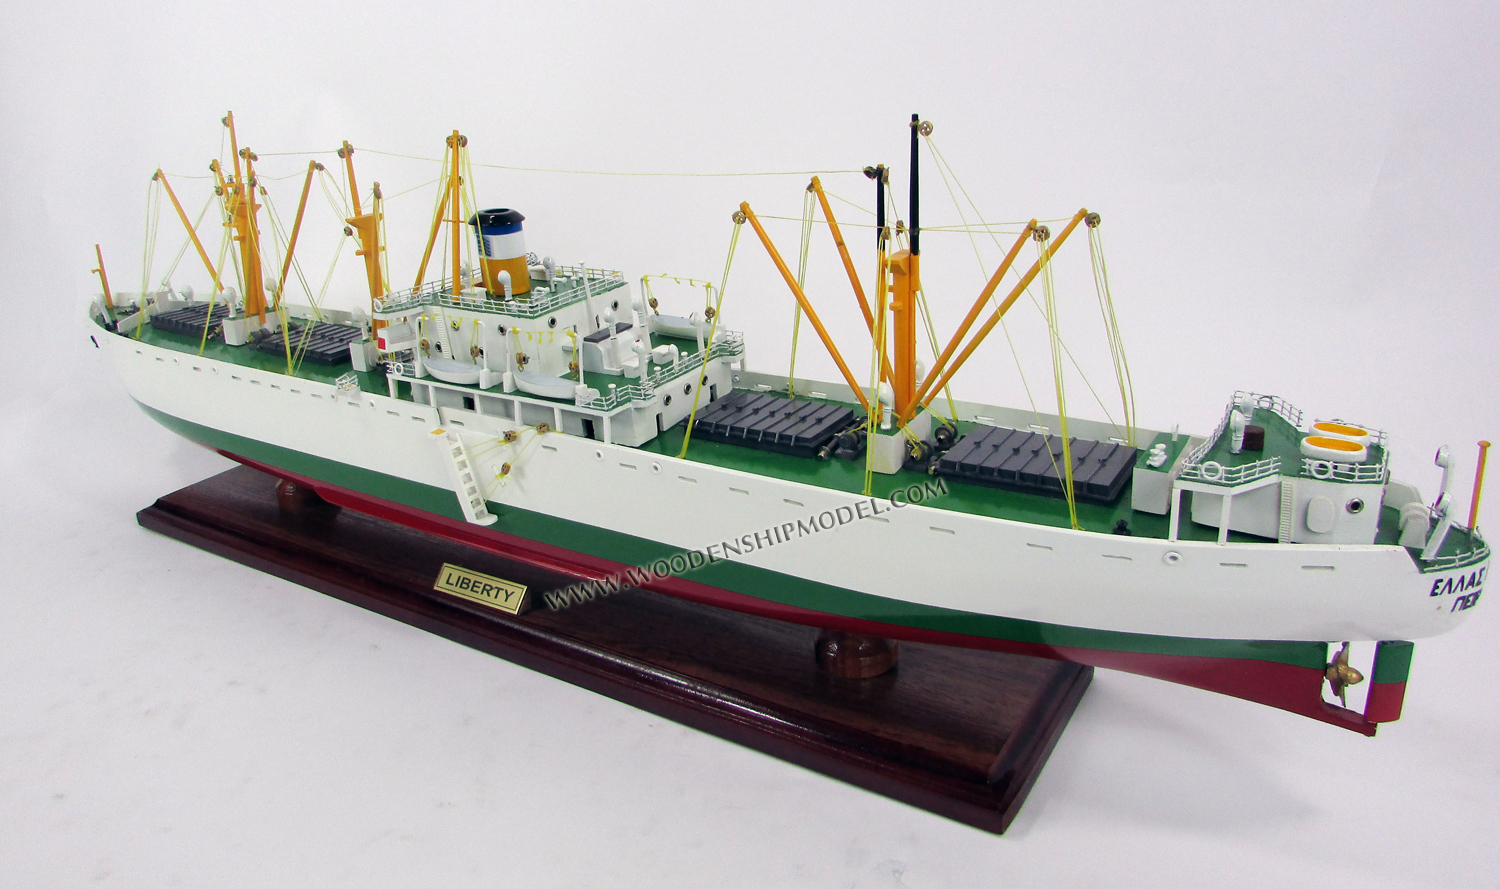 Collins Submarine Model Ship ready for display